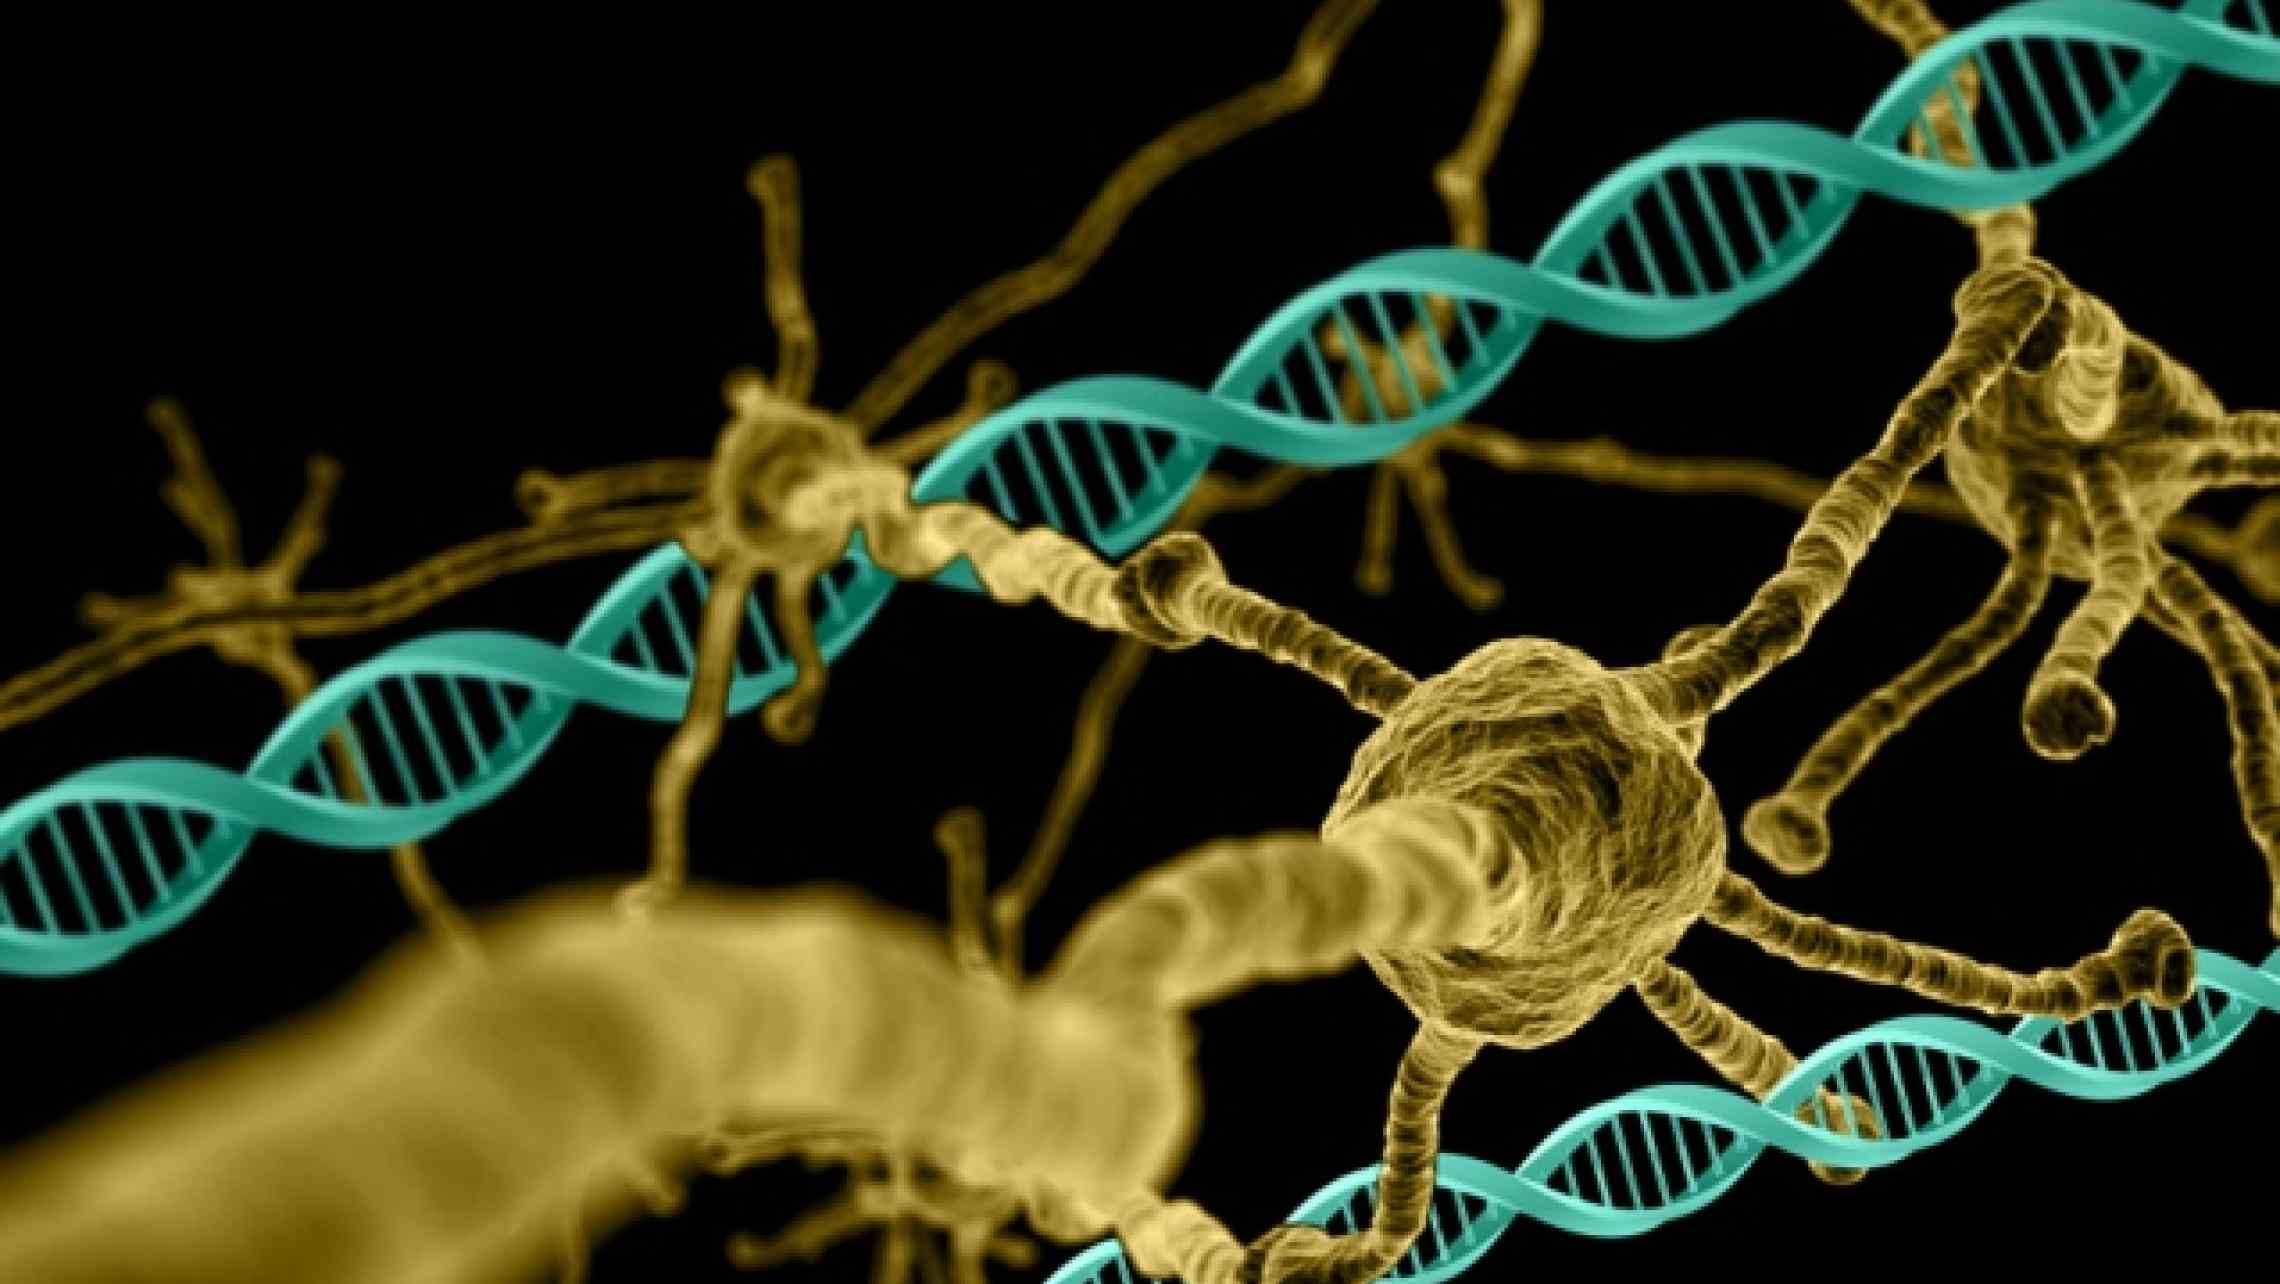 GENETIC SCREEN OFFERS NEW DRUG TARGETS FOR HUNTINGTON’S DISEASE